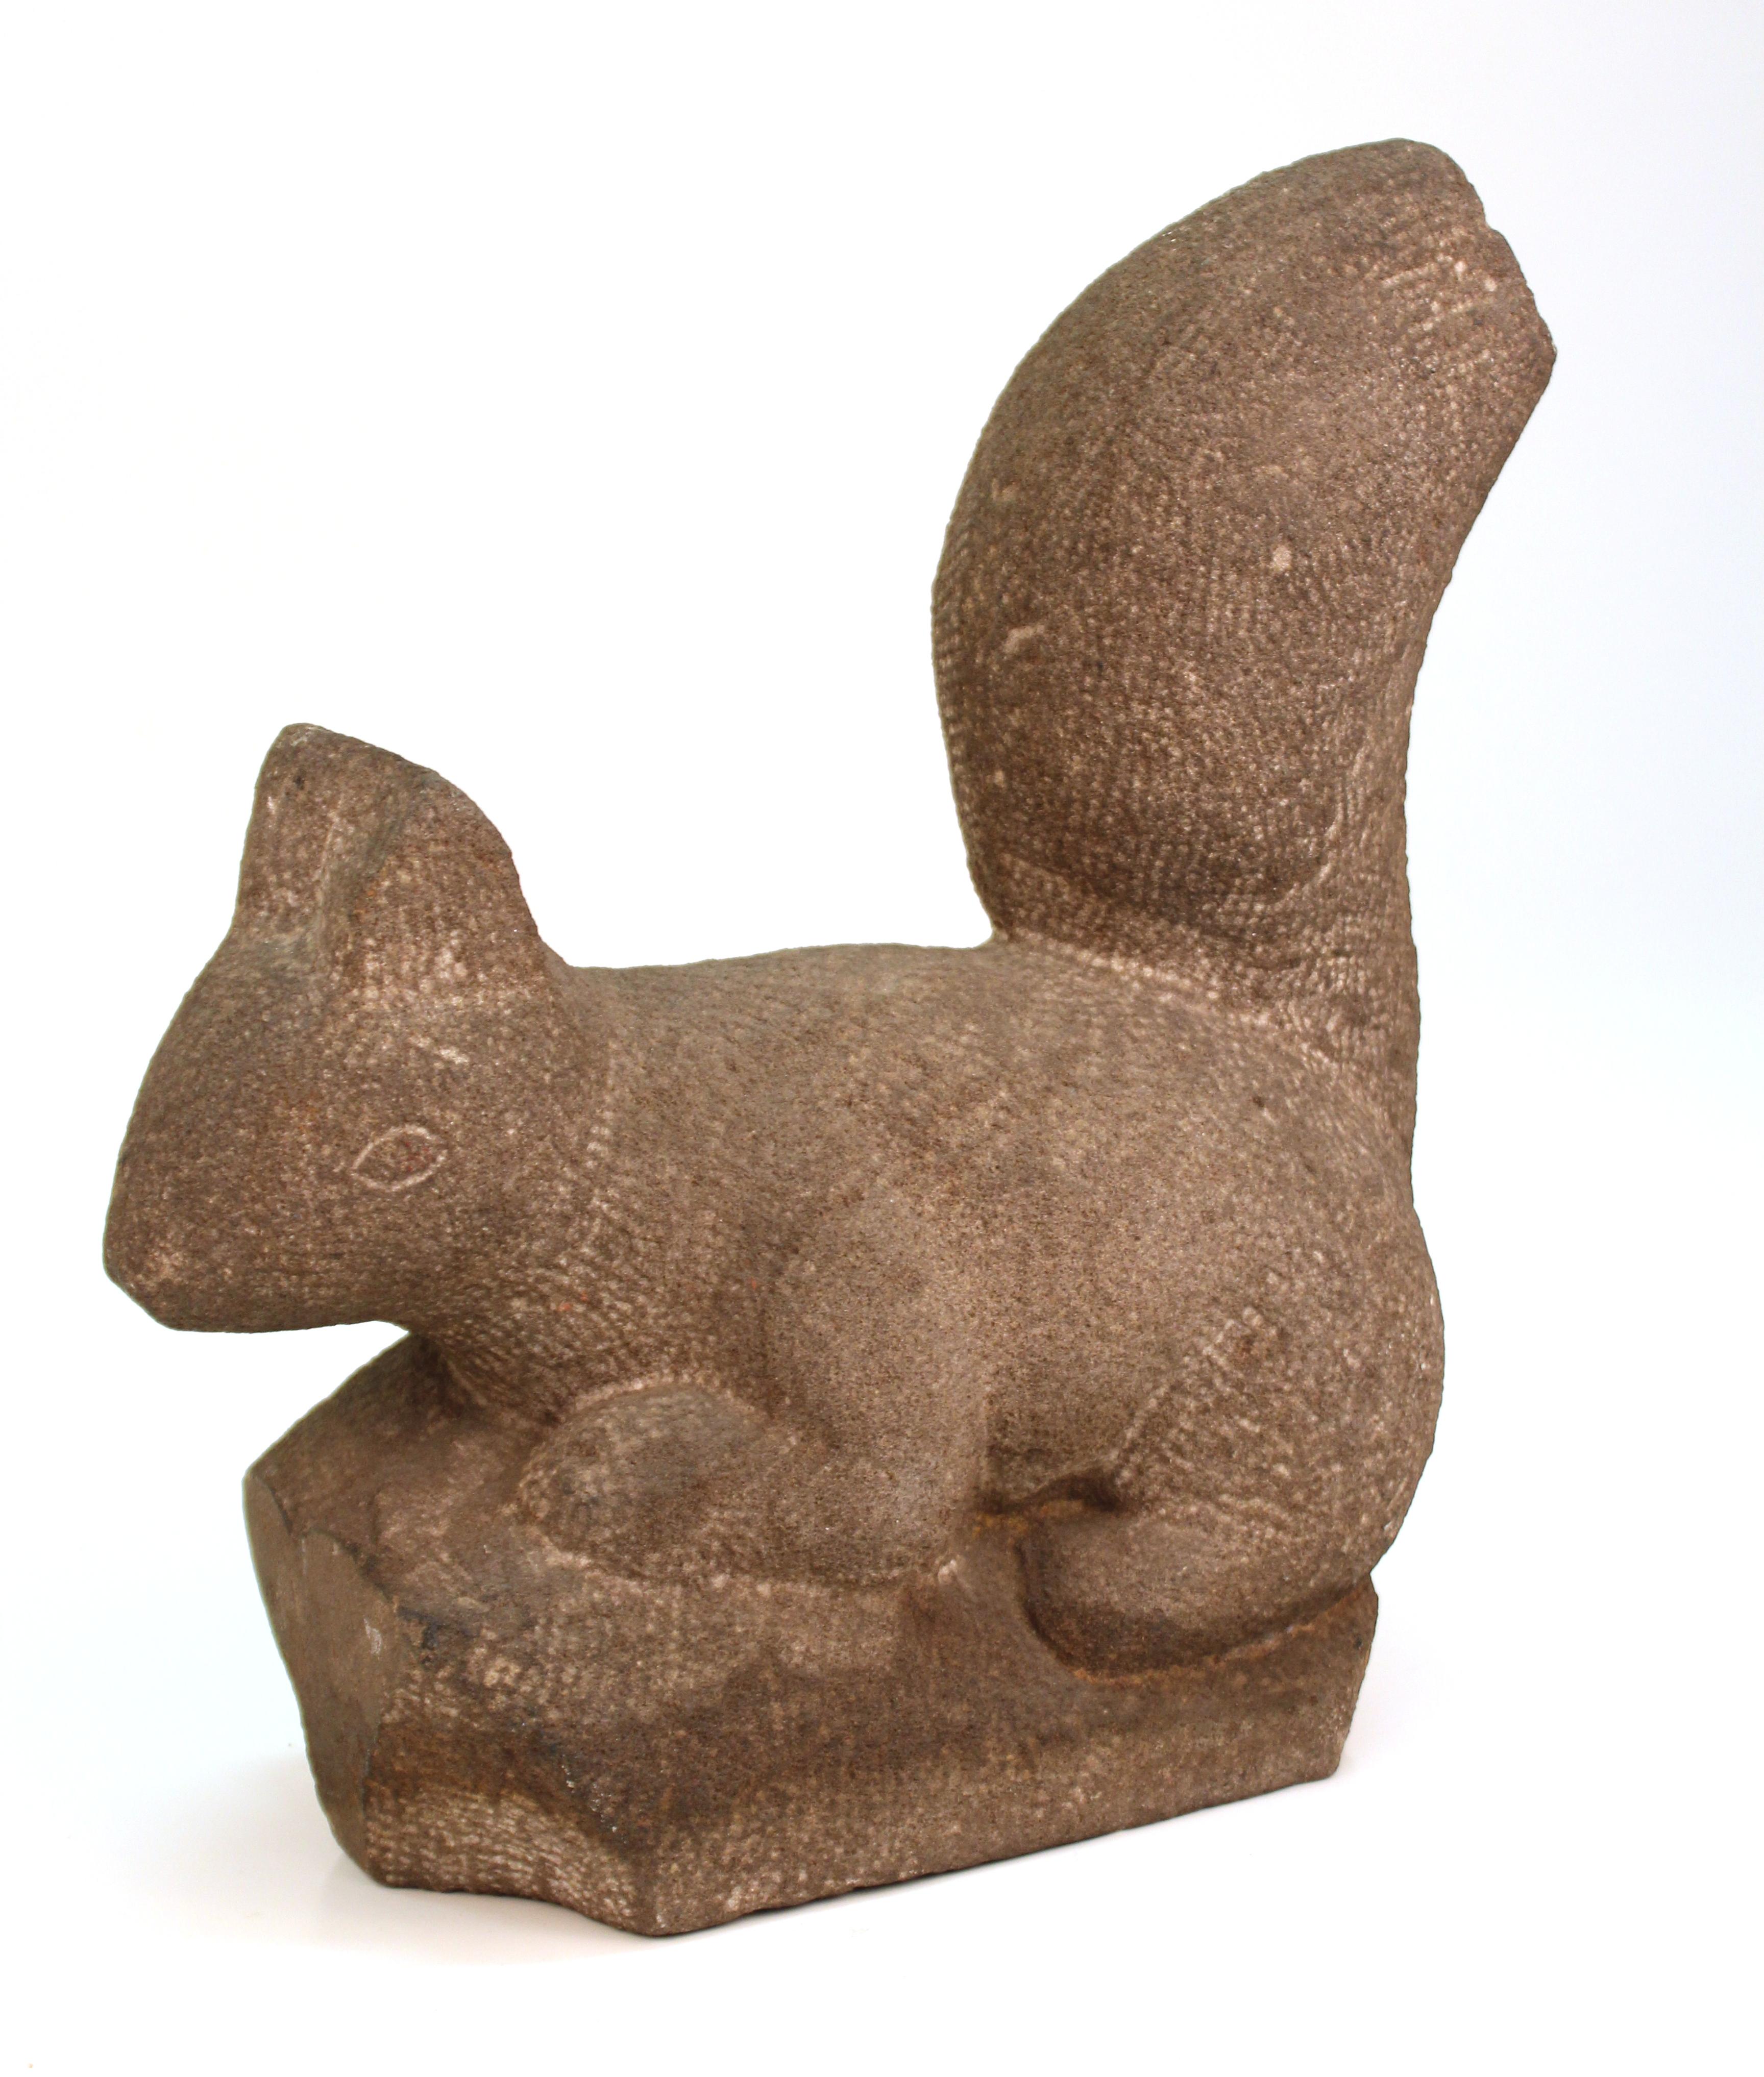 Squirrel sculpture by Hungarian-American artist and sculptor Henry Schoenbauer (1895 Hungary - 1973), carved in stone. The piece was created during the mid-20th century. The artists' signature is carved on the bottom of piece. In great vintage